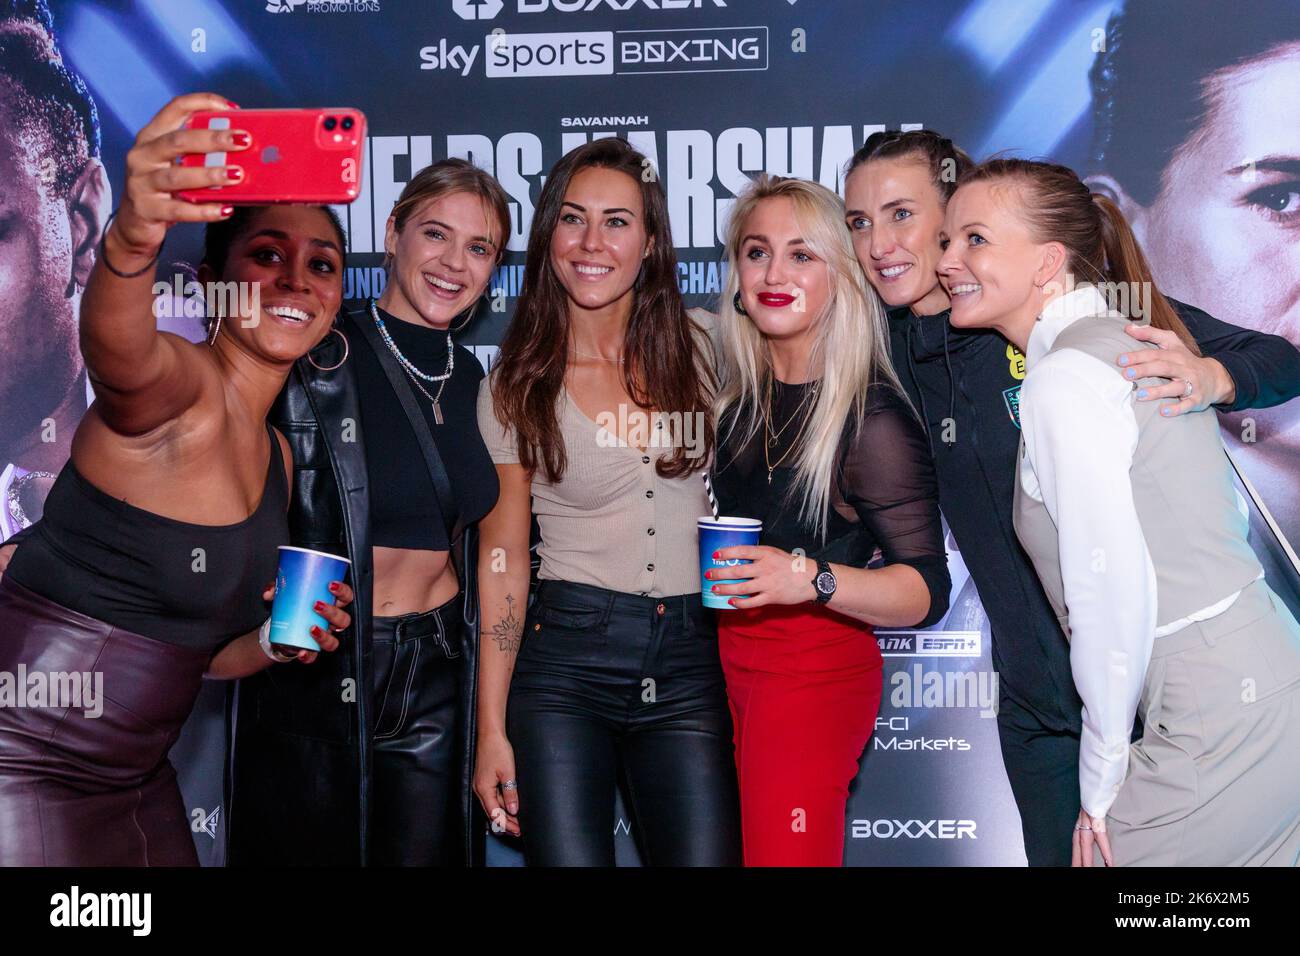 The O2, London, UK. 15th October 2022.  Ebony Rainford-Brent, Laura Crane, Lucy Cork, Aimee Fuller, Jill Scott and Shelley Unitt take a selfie on the red carpet at The O2 for the first-ever all-female boxing event in history.  Savannah Marshall and Claressa Shields will headline Boxxer’s Legacy show for the Undisputed World Middleweight Title. Photo by Amanda Rose/Alamy Live News Stock Photo